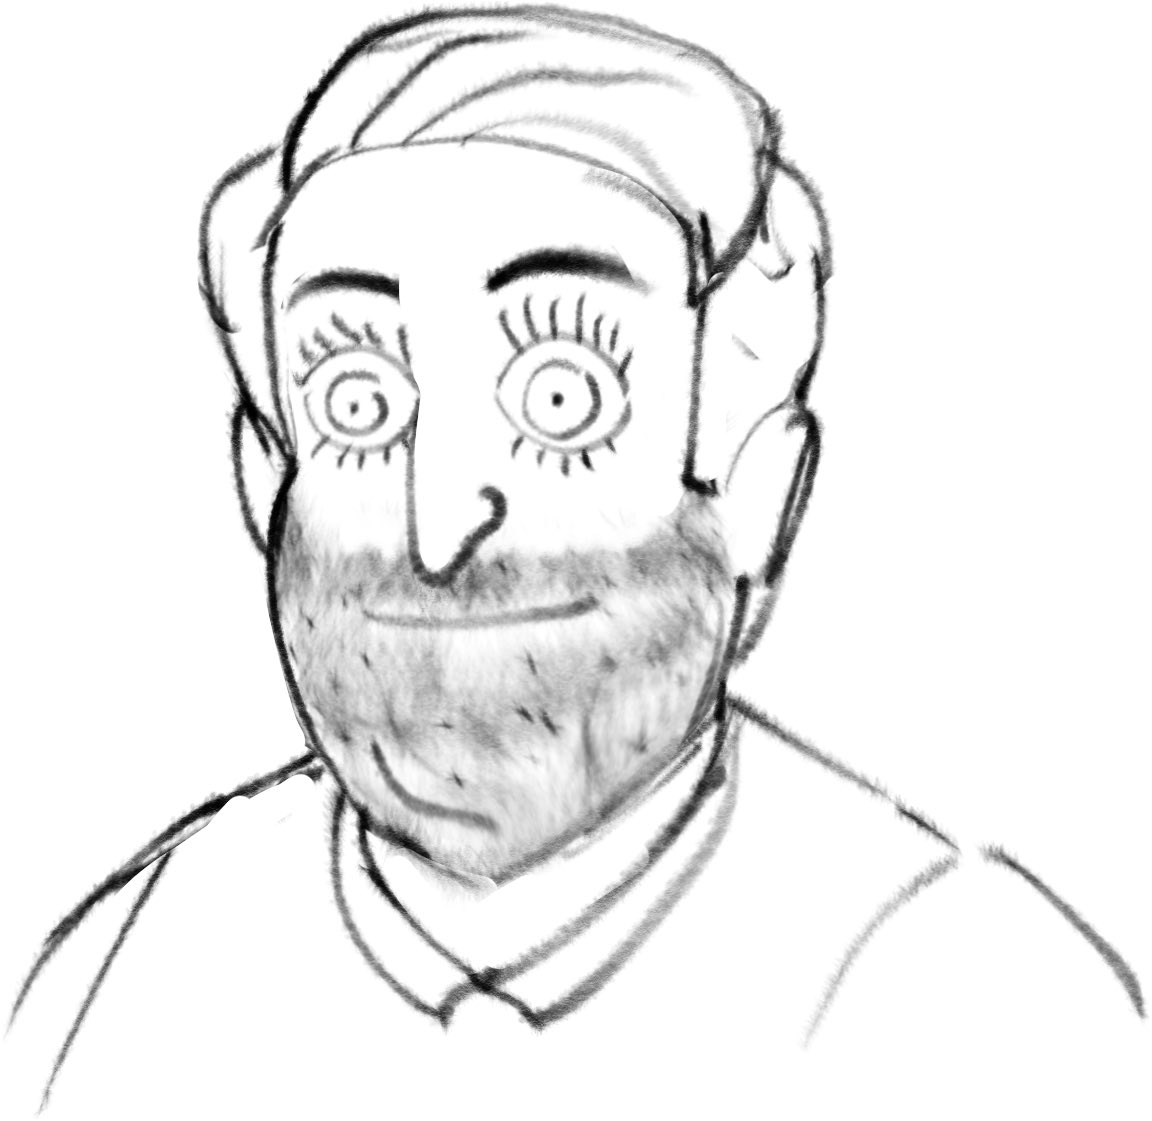 Wade Whipple from memory